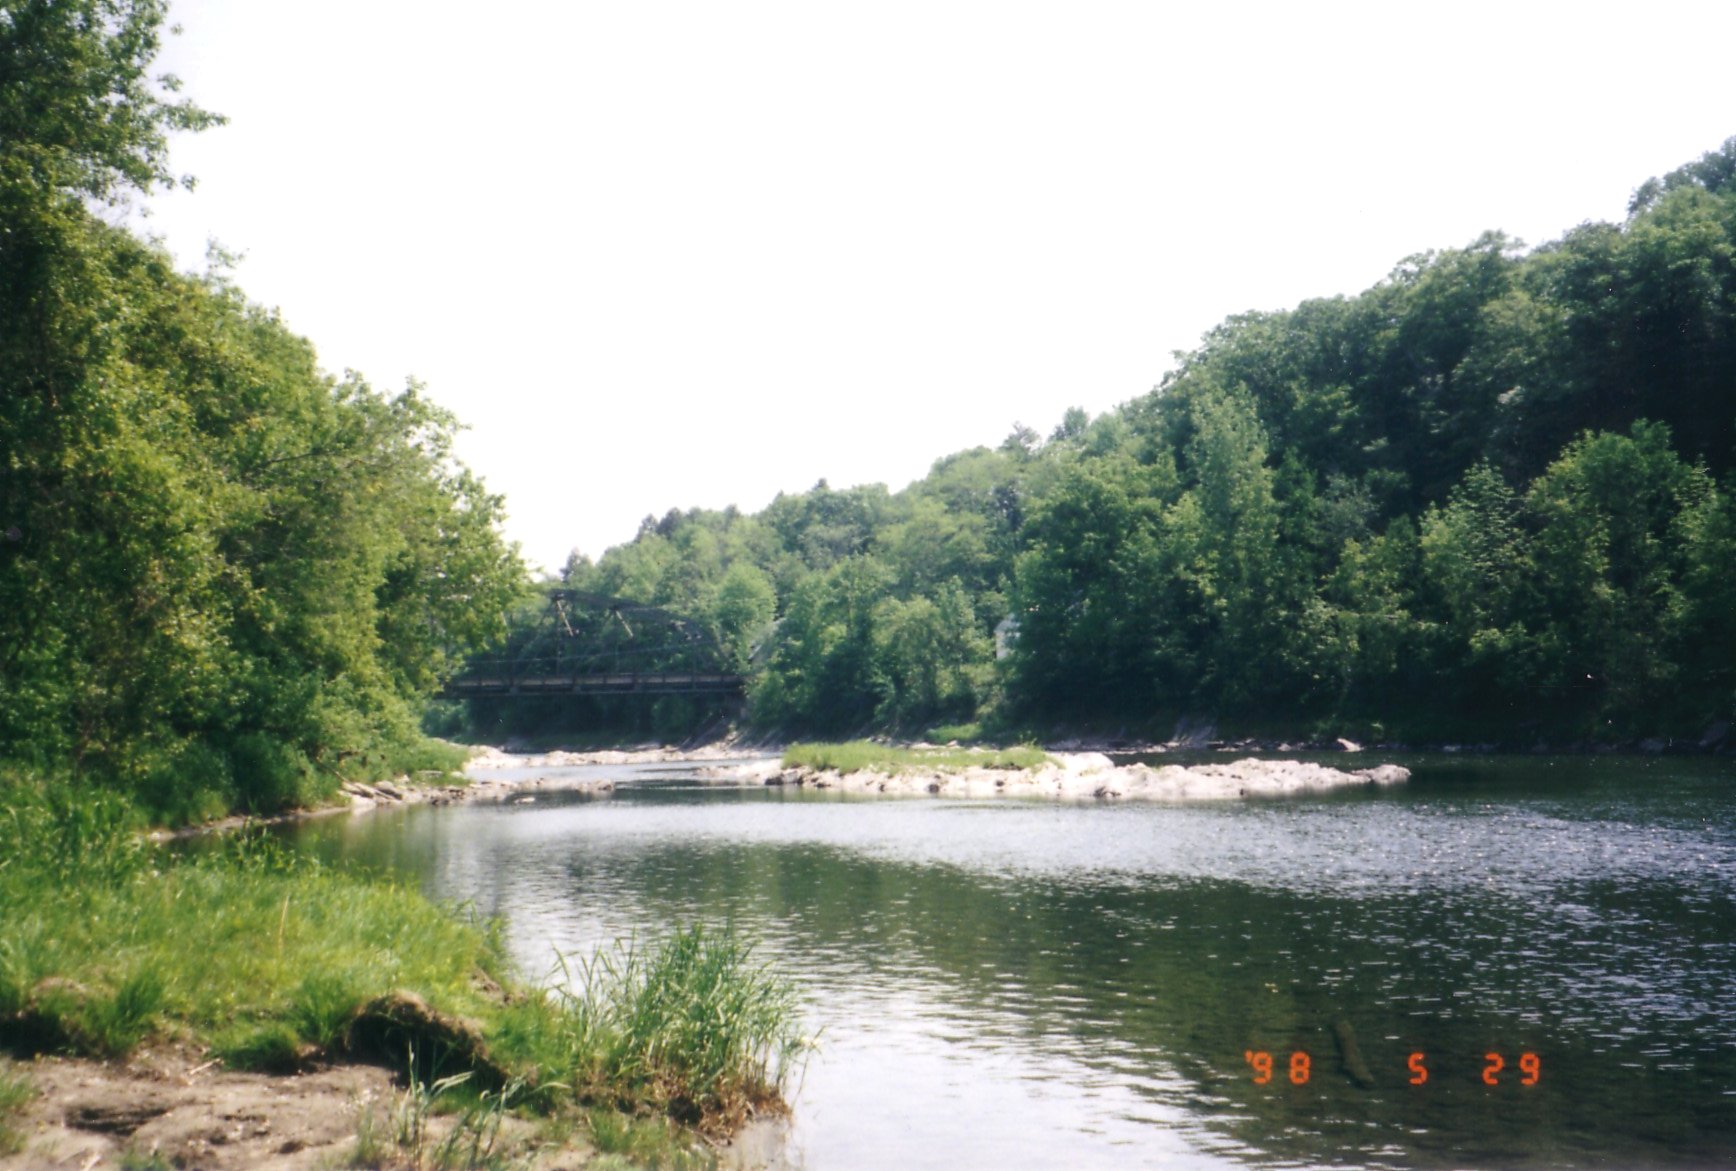 Photograph of the White River at West Hartford, VT (WEHV1)